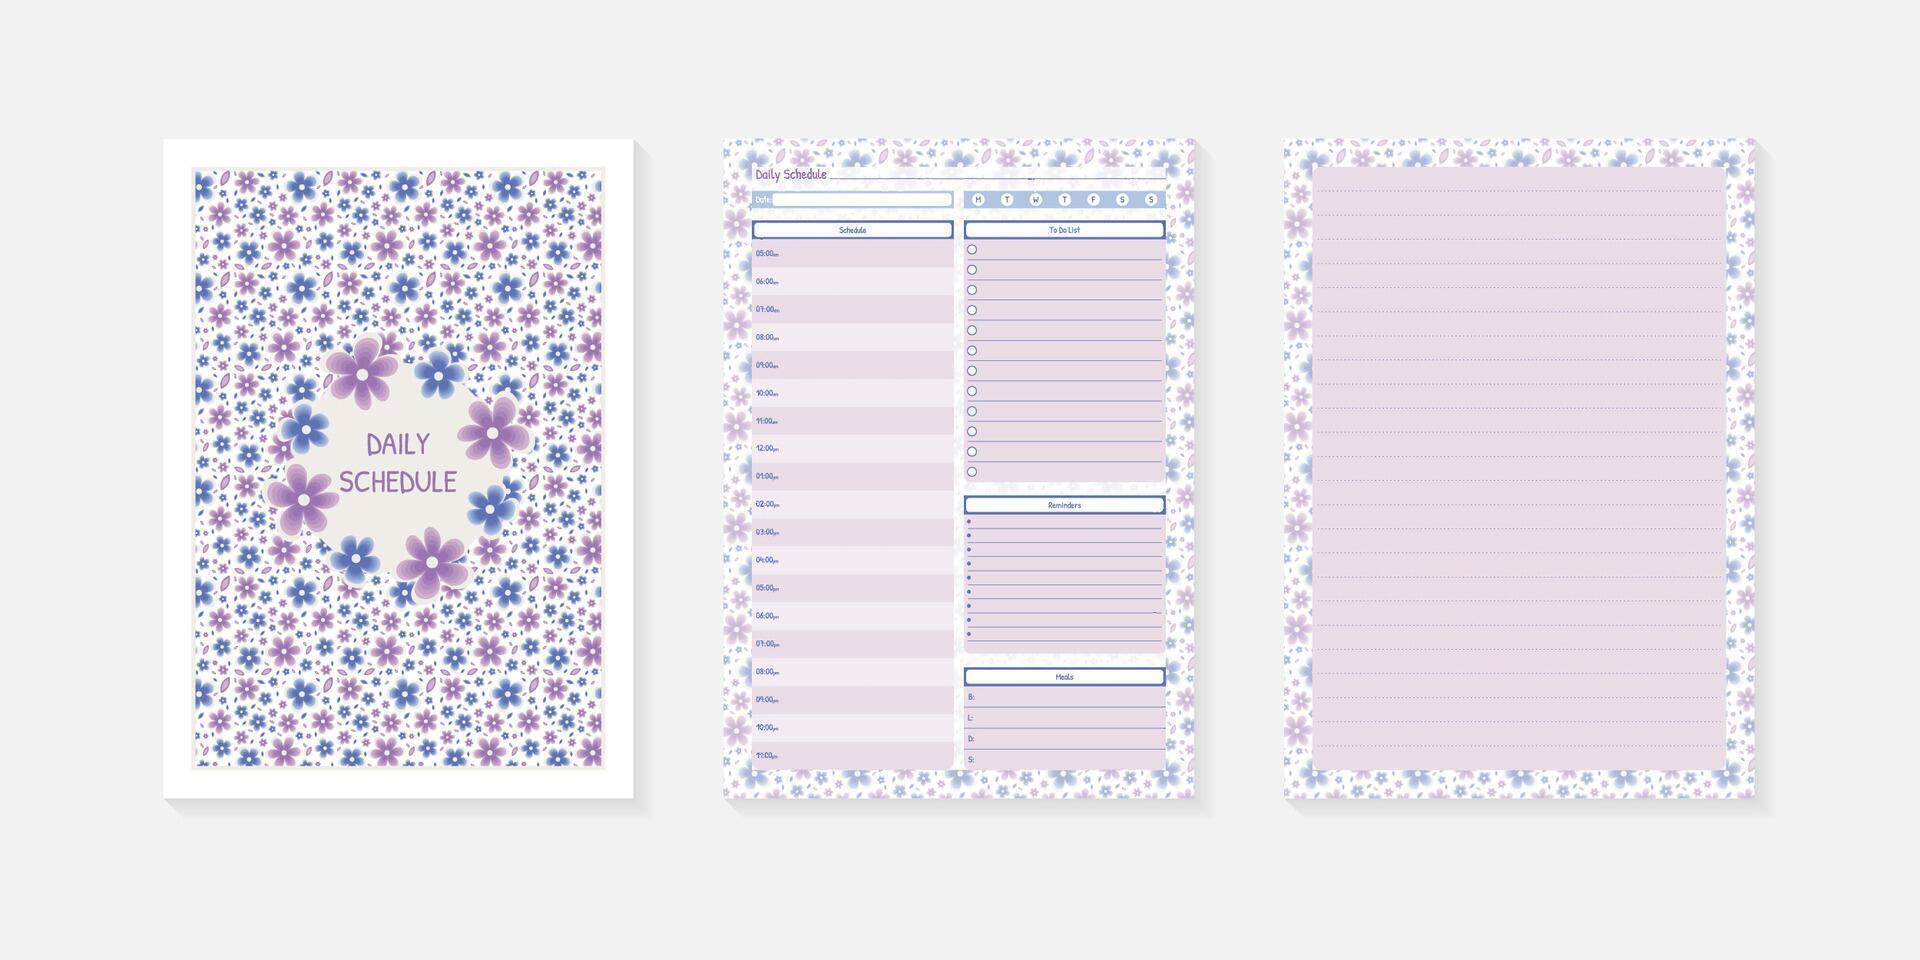 Daily Schedule Planner with cover and floral patterns vector